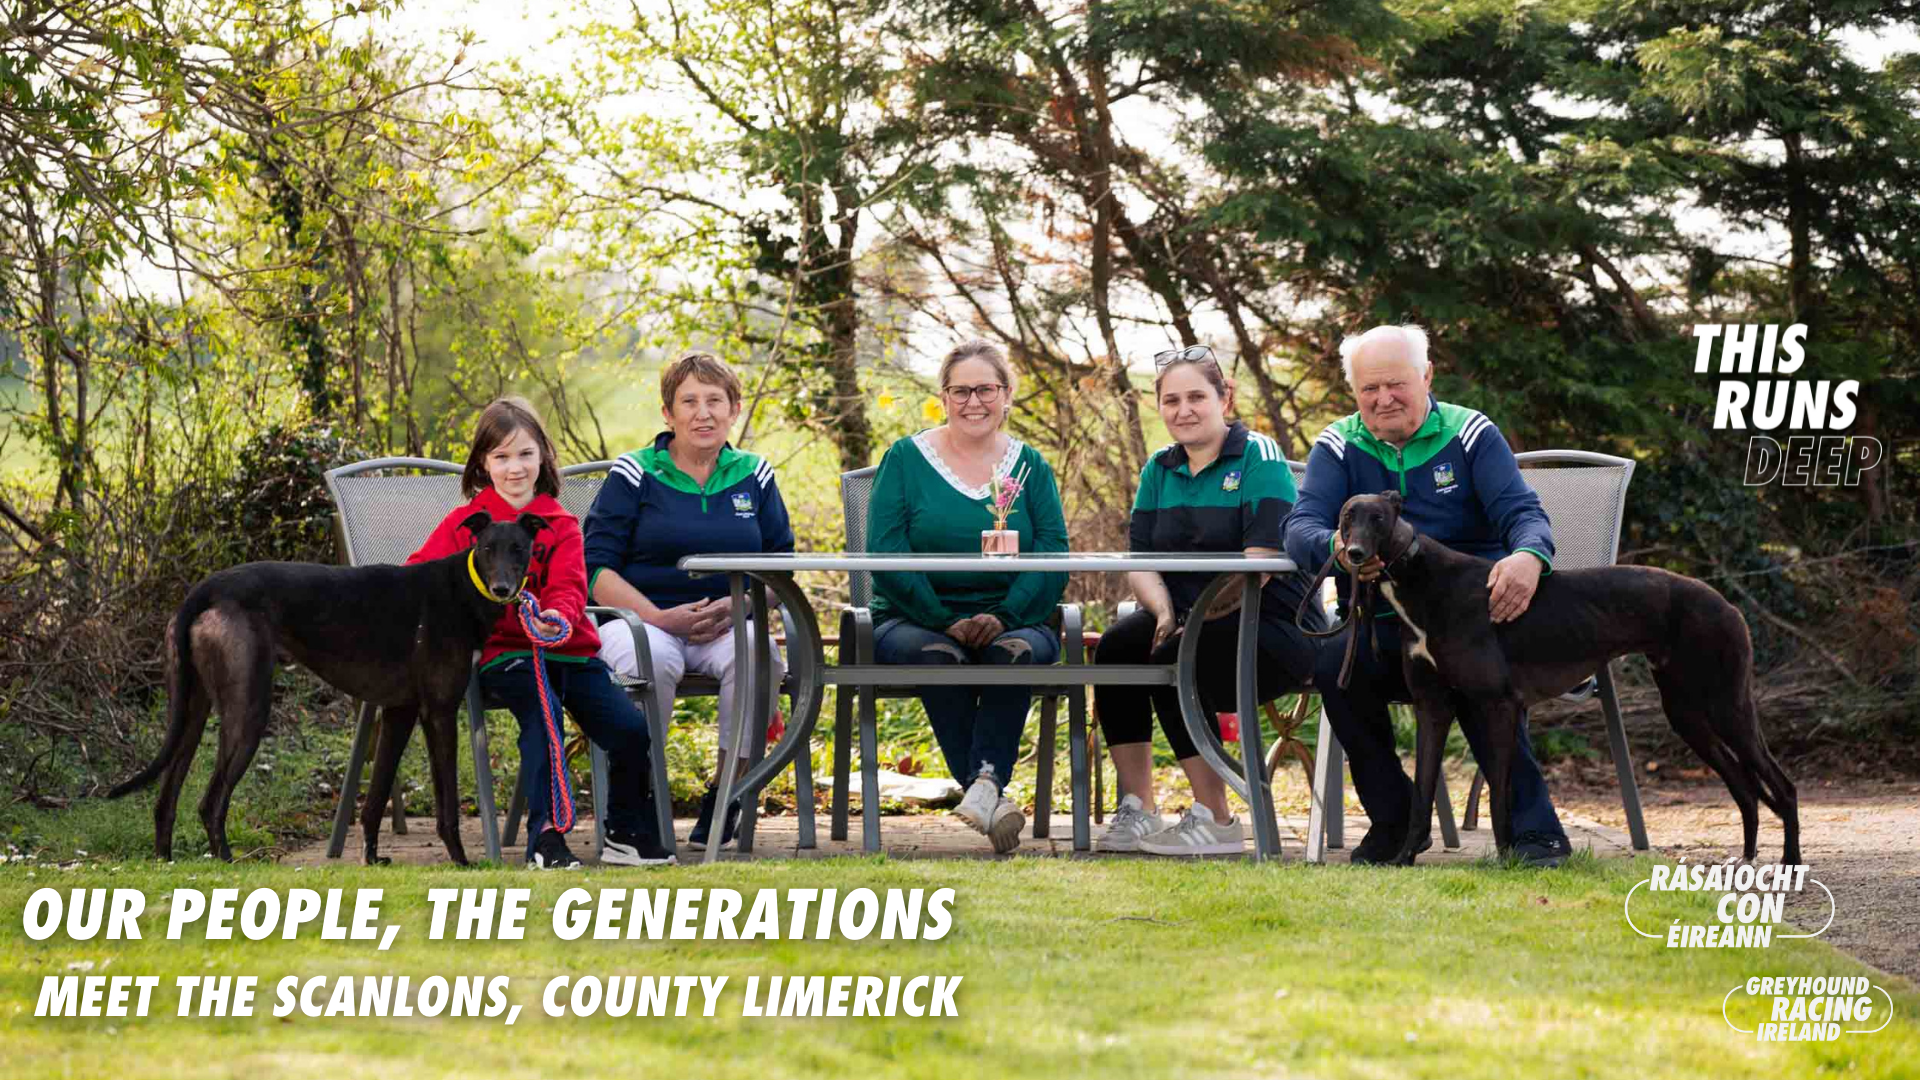 Meet the Scanlon family from County Limerick, one of the many proud families involved in Irish Greyhound Racing 